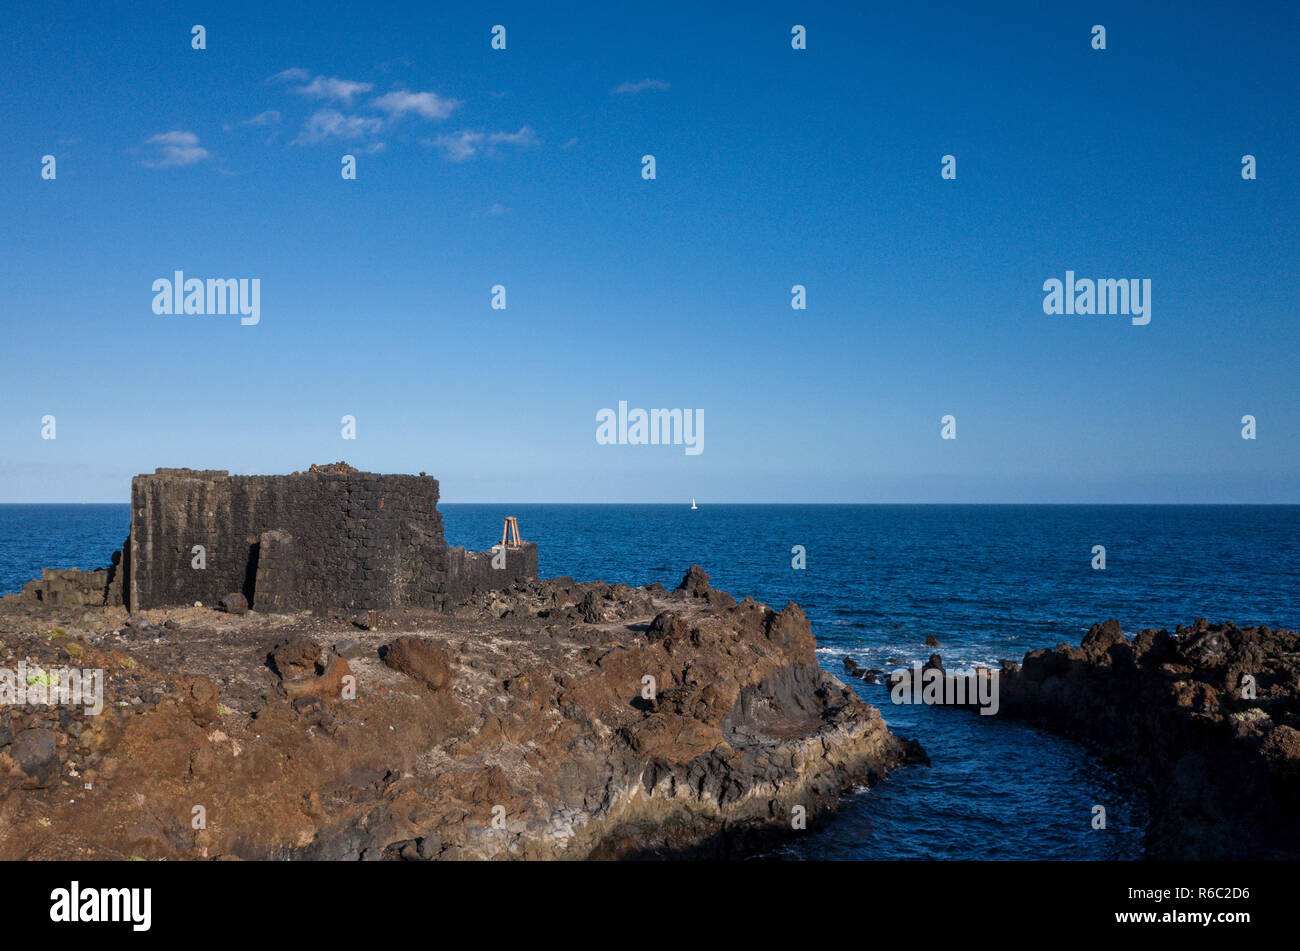 Shoreline, Los Cancajos.  La Palma.  The lava rock coastal landform that are typical of the island.  The remains of an old tower remain on a piece of land mass protruding into the ocean. Stock Photo